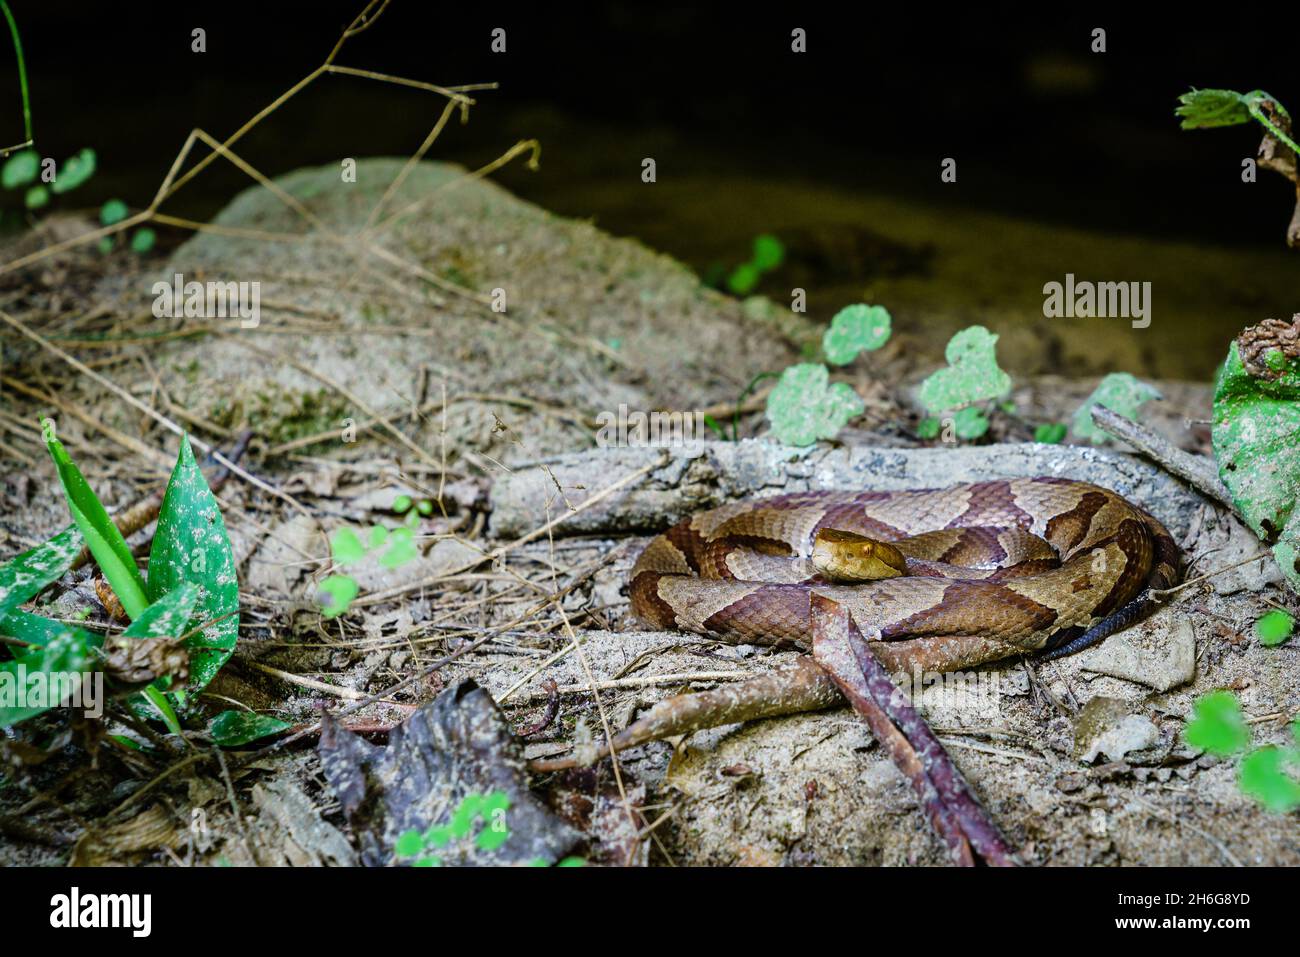 Close-up image of a coiled copperhead snake in Southern Kentucky Stock Photo